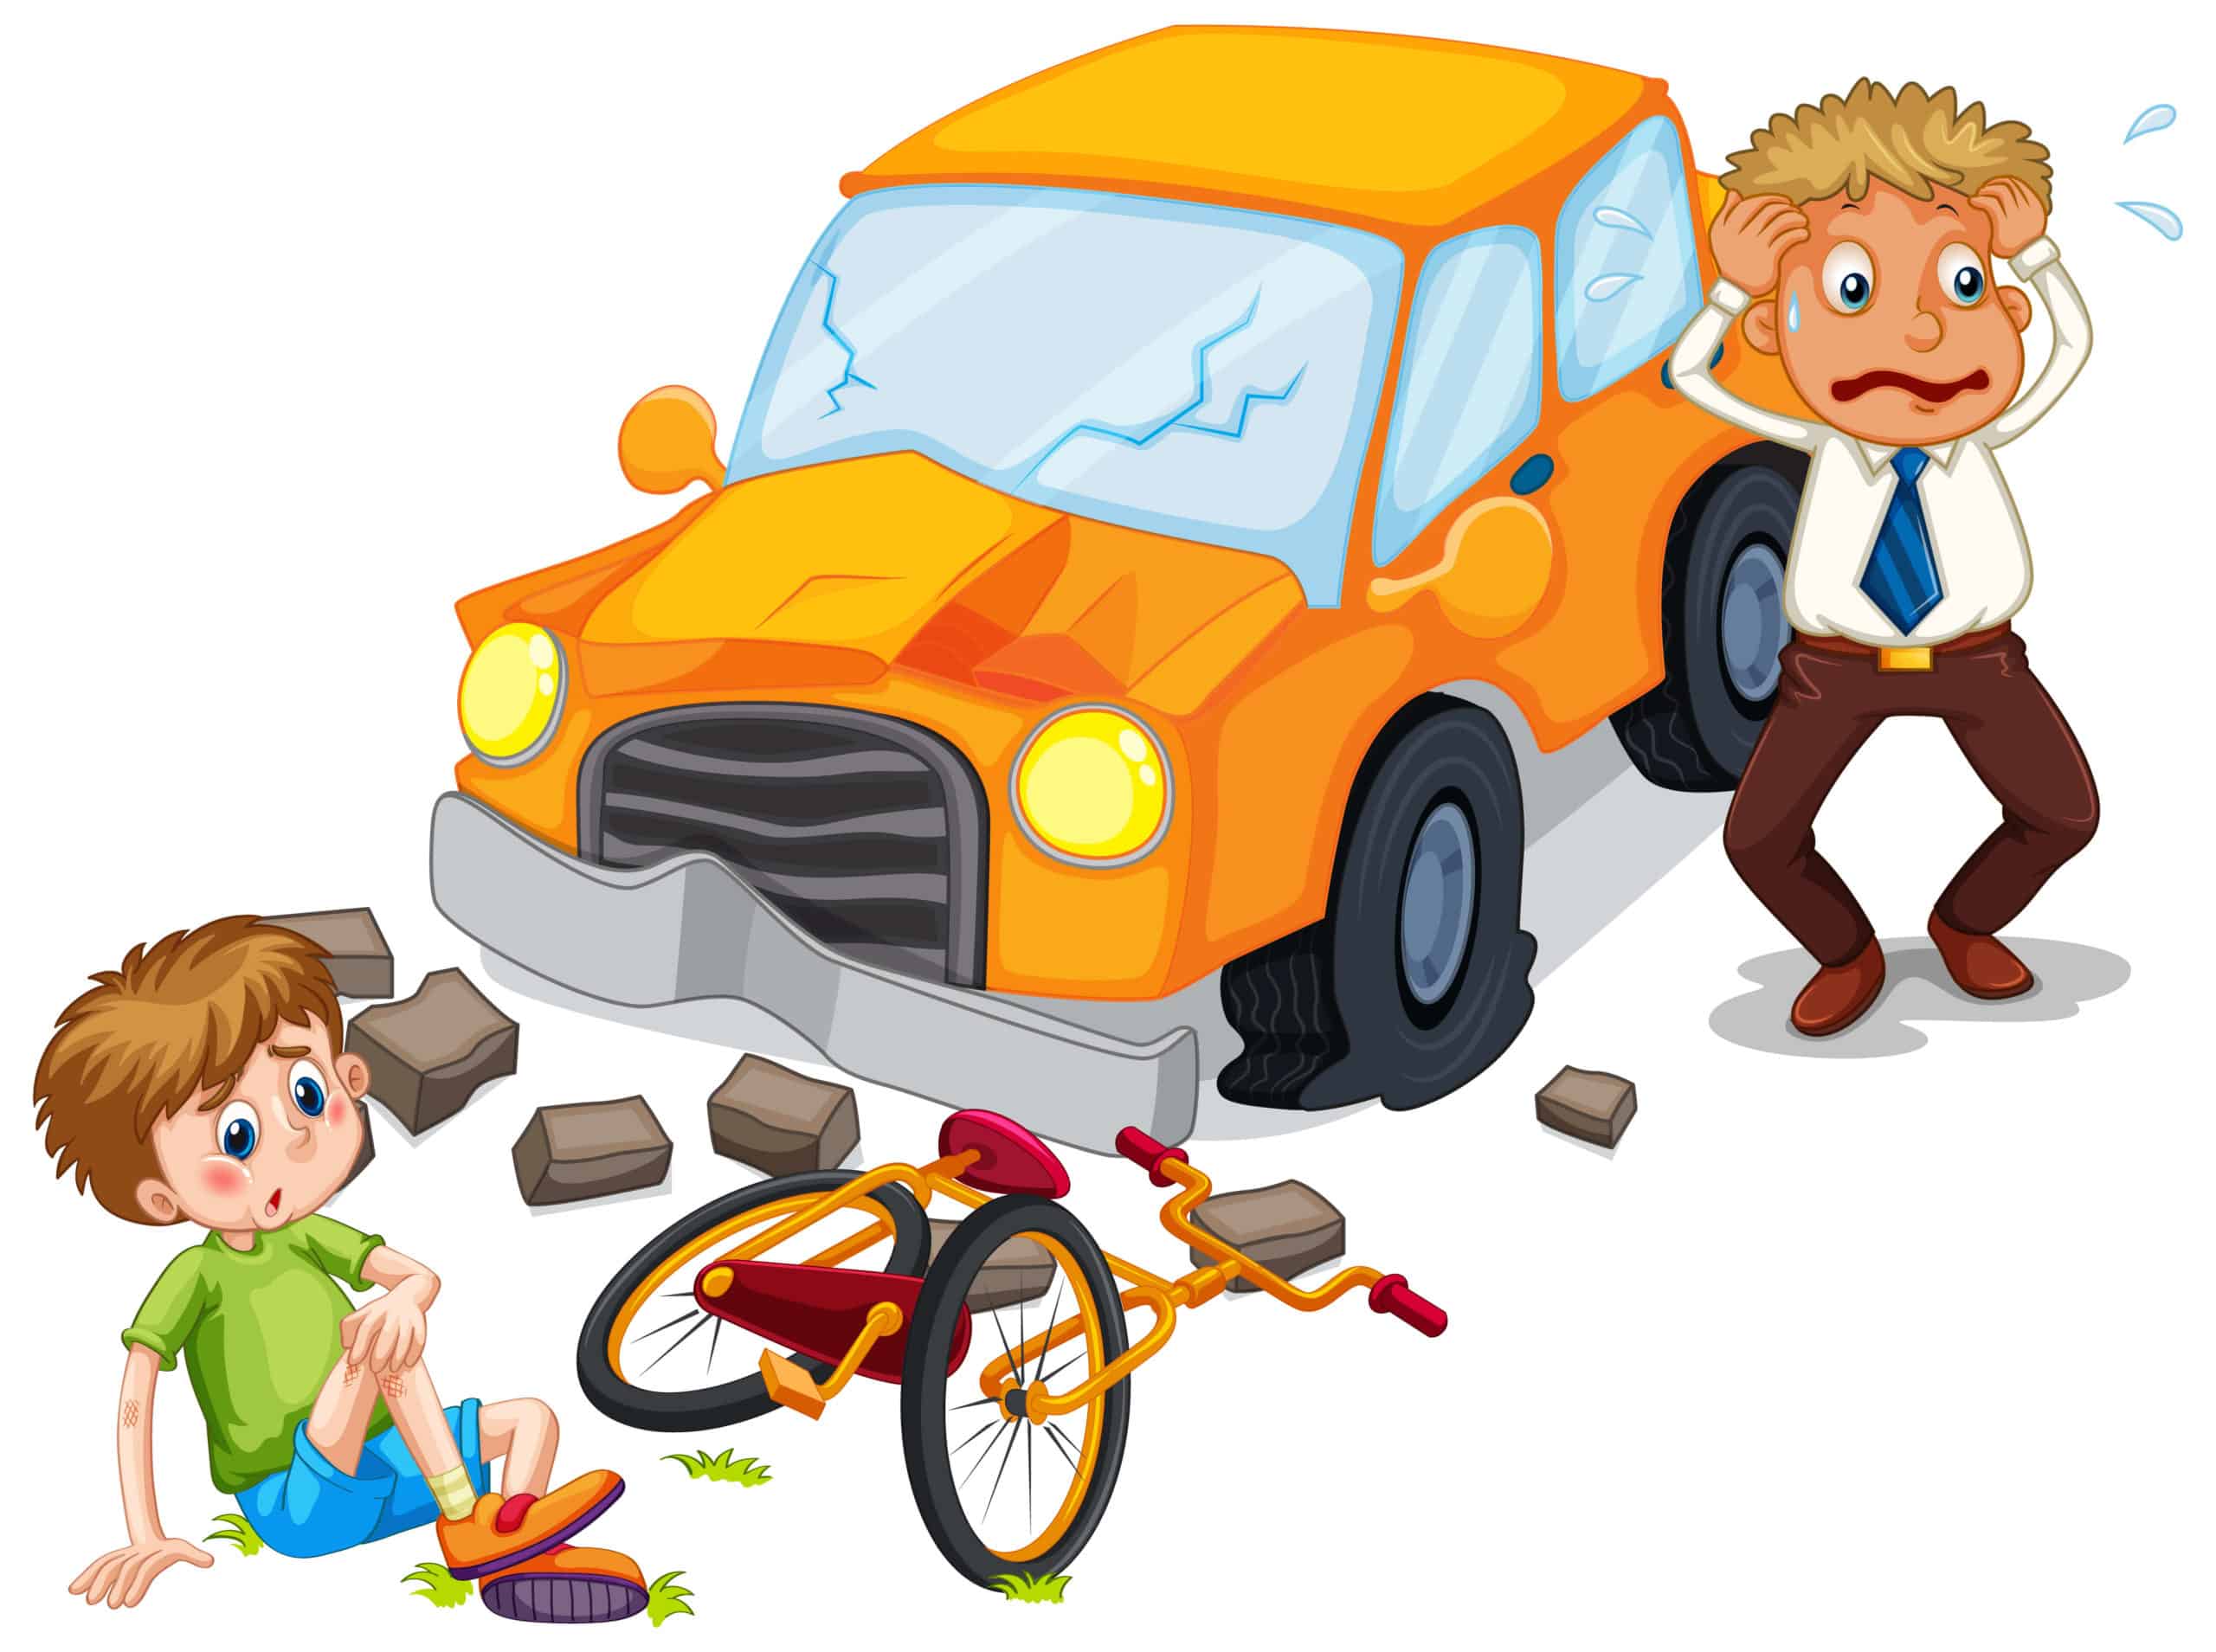 Car Accident Clipart / Accident Cartoon Clipart Free download on.